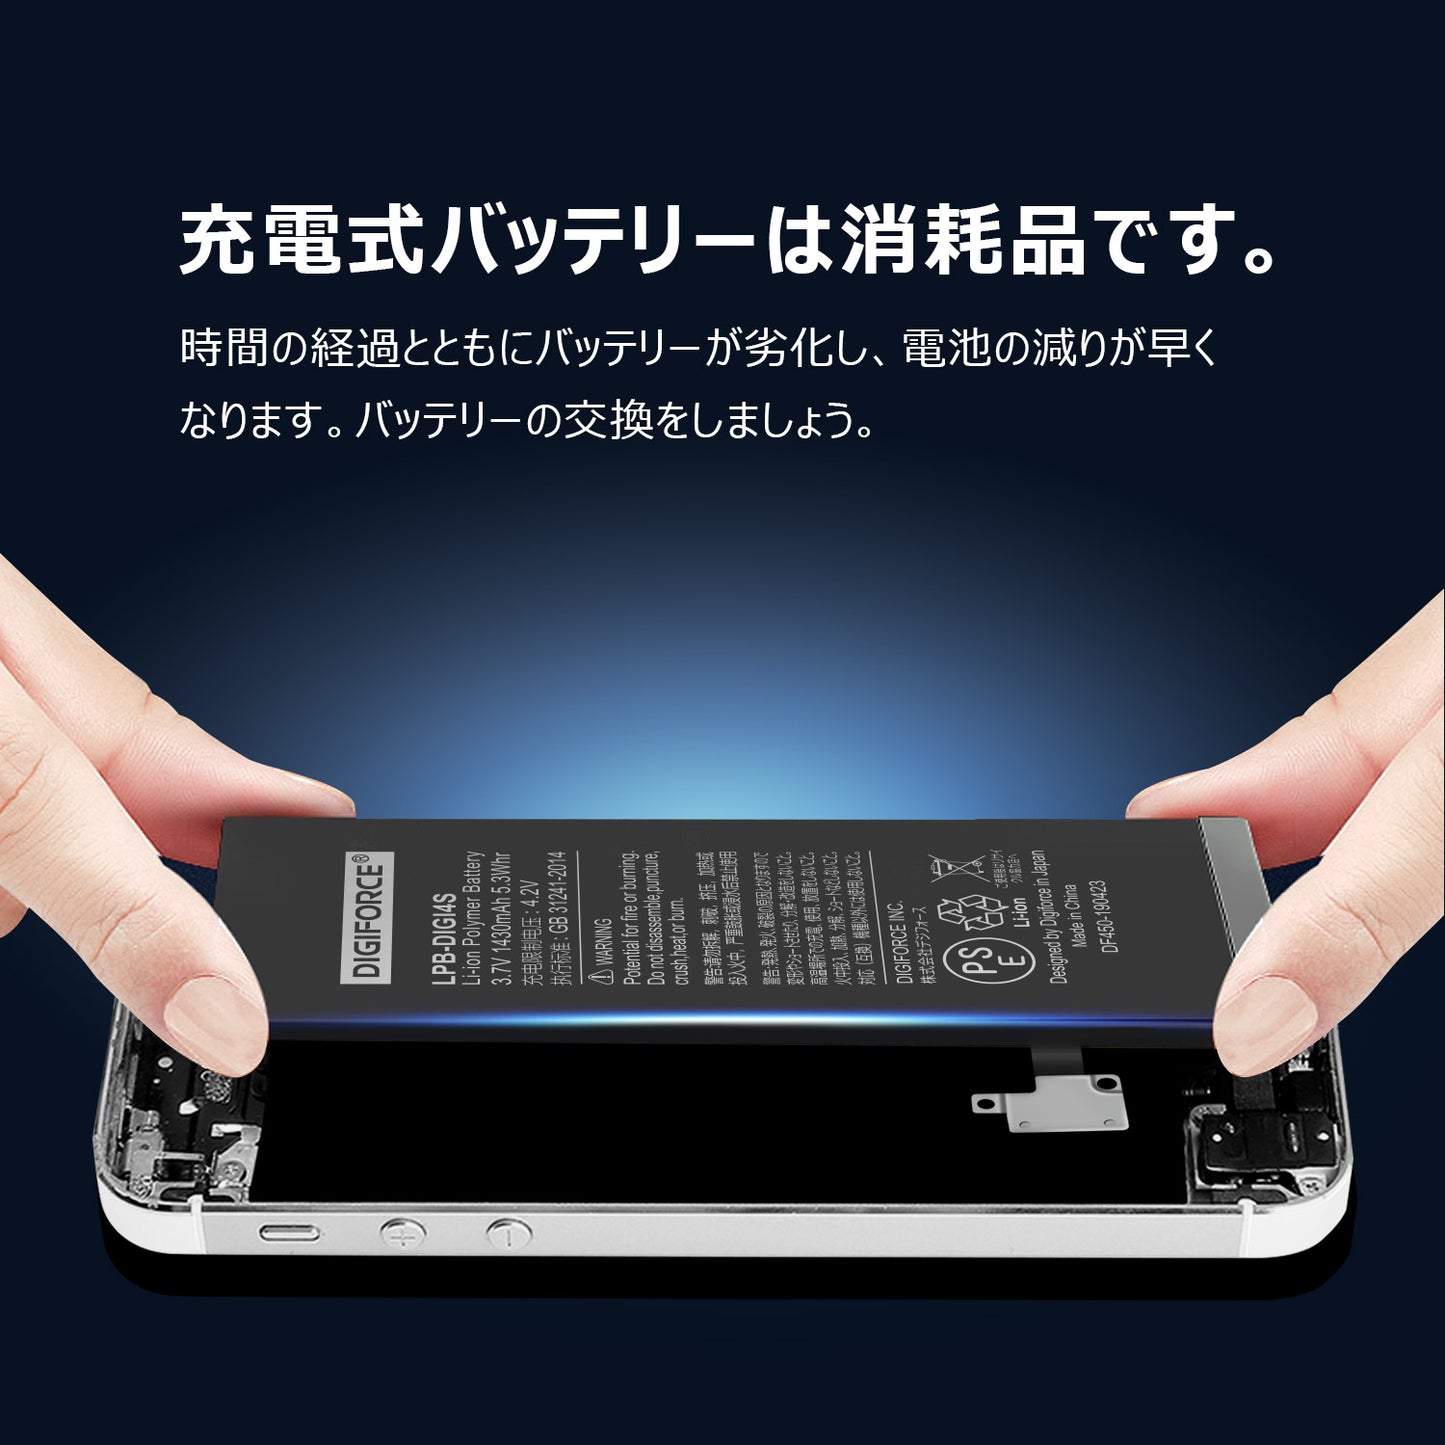 【iPhone 4S】互換バッテリー　S-IP4S